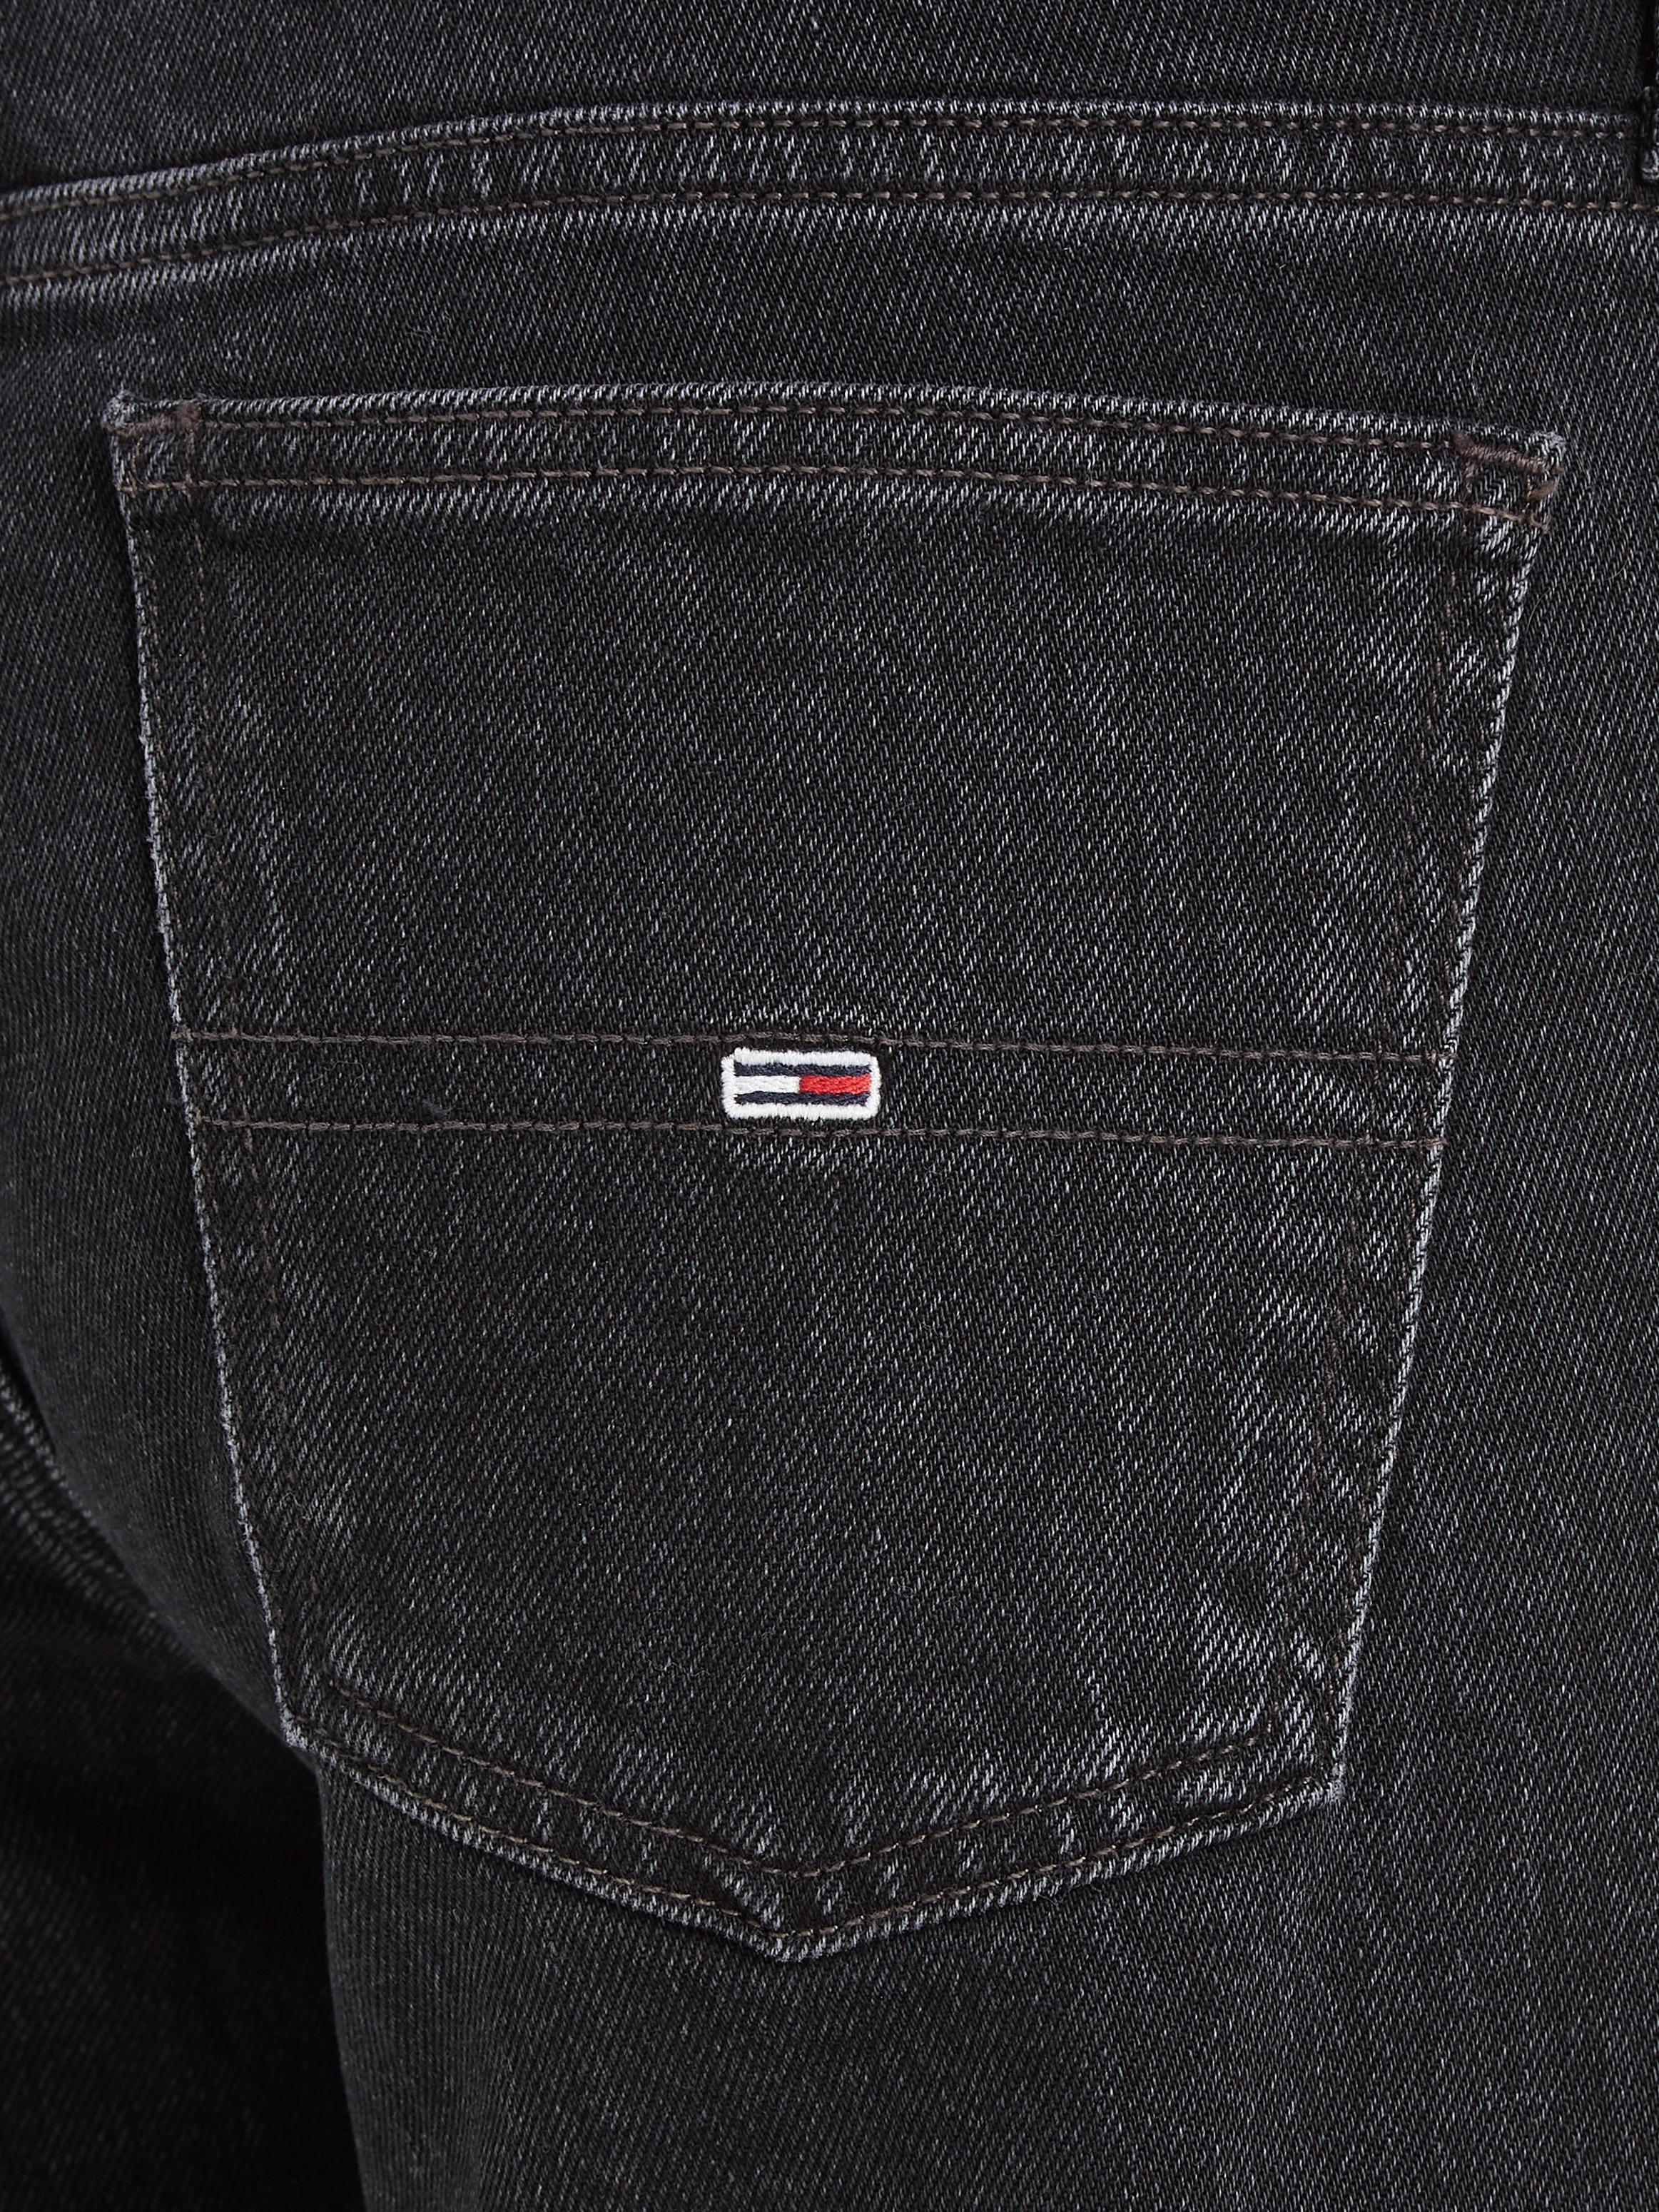 ♕ Logobadge Schlagjeans, mit Jeans Tommy bei Jeans Tommy